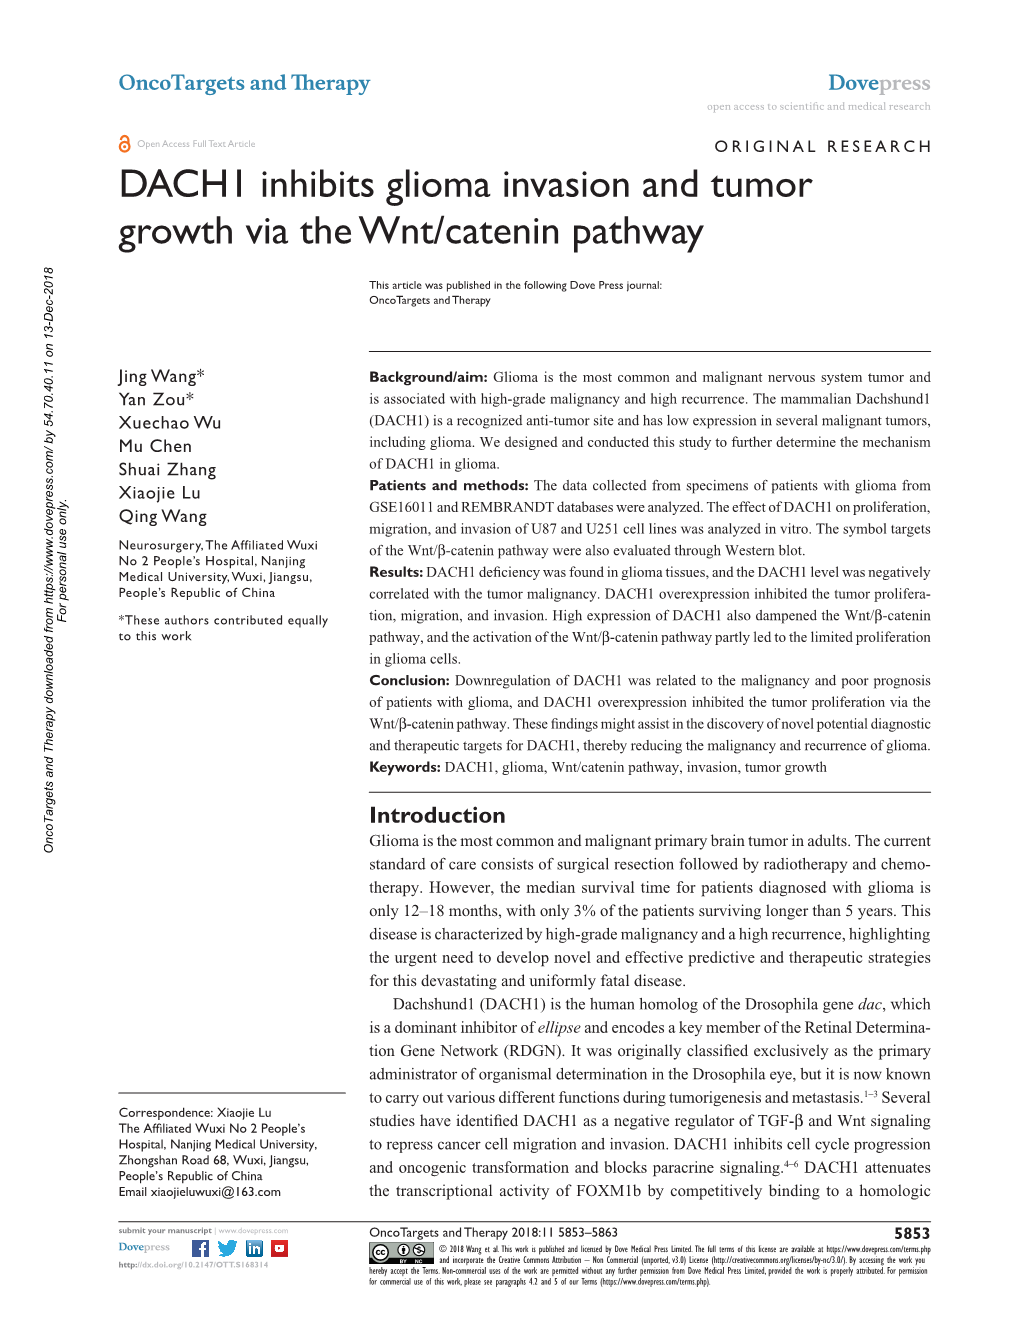 DACH1 Inhibits Glioma Invasion and Tumor Growth Via the Wnt/Catenin Pathway